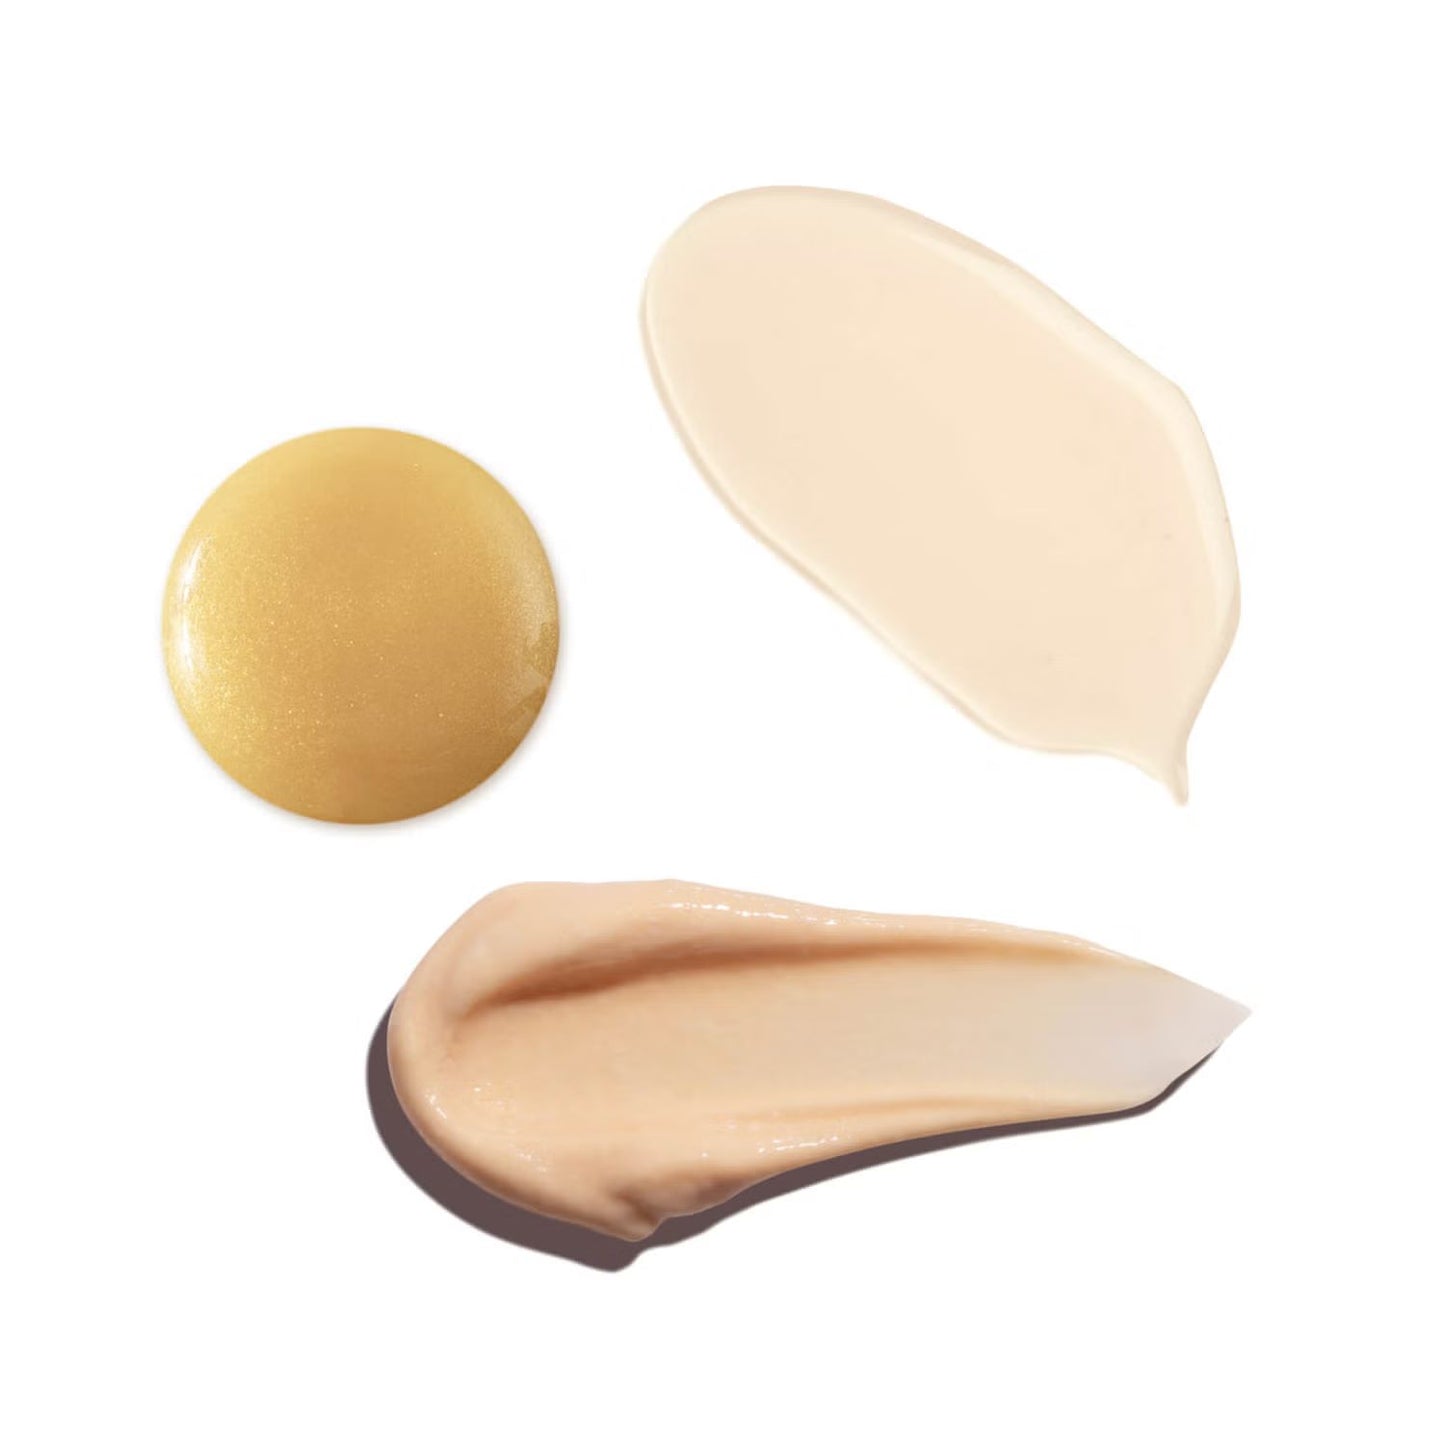 Cosmetic swatches in beige, yellow and brown